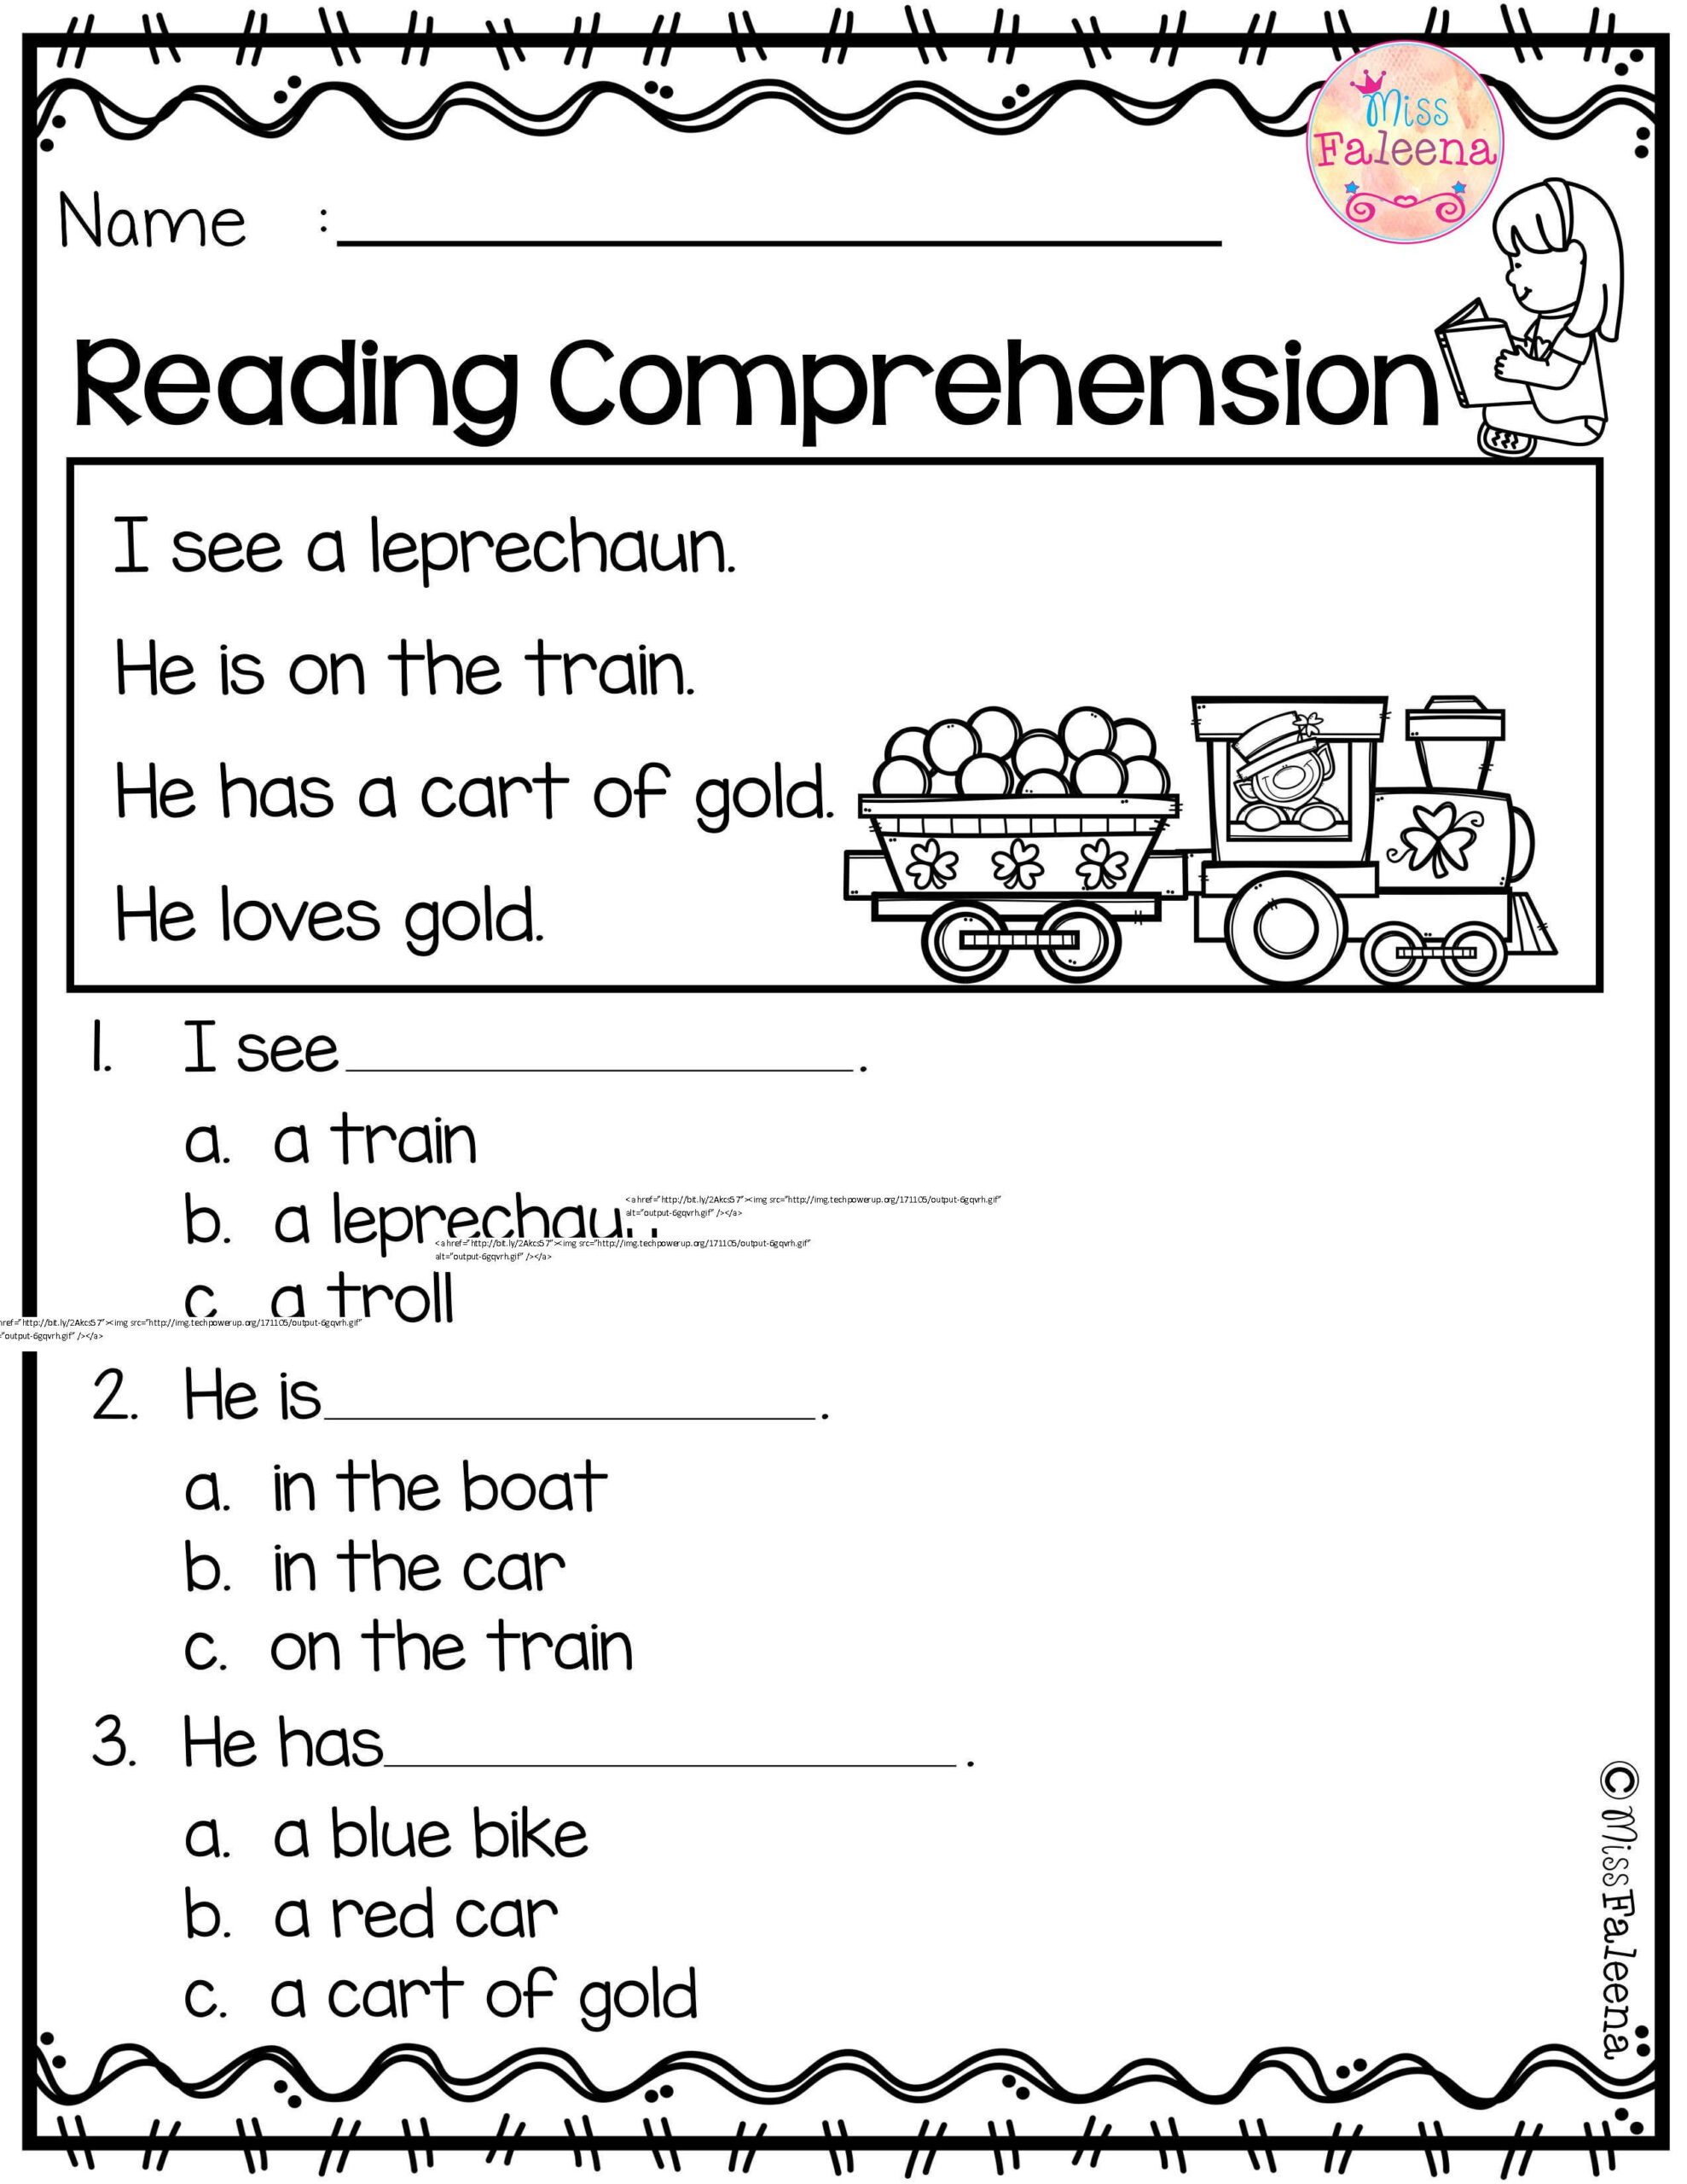 March Reading Comprehension Is Suitable For Kindergarten Students Or B 